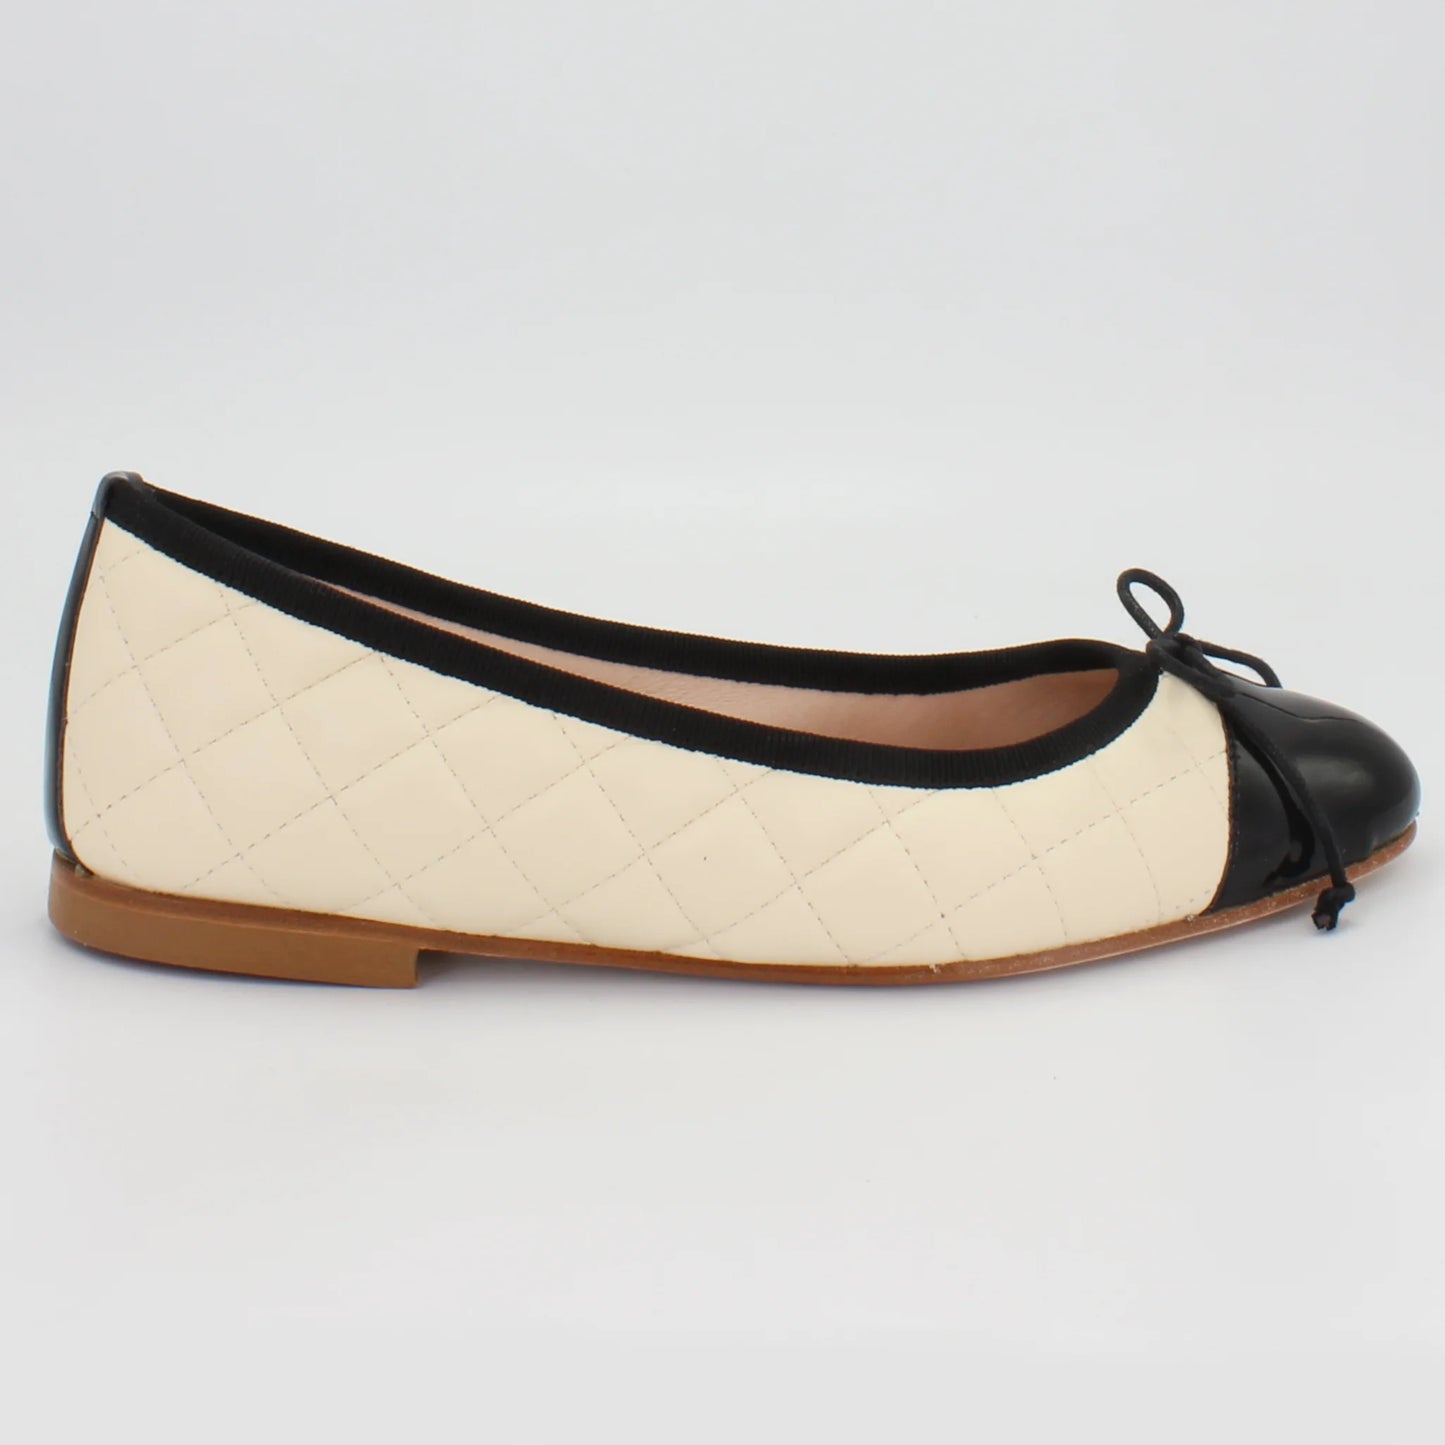 Shop Handmade Italian Leather ballerina pump in panna (E504) or browse our range of hand-made Italian shoes in leather or suede in-store at Aliverti Cape Town, or shop online. We deliver in South Africa & offer multiple payment plans as well as accept multiple safe & secure payment methods.